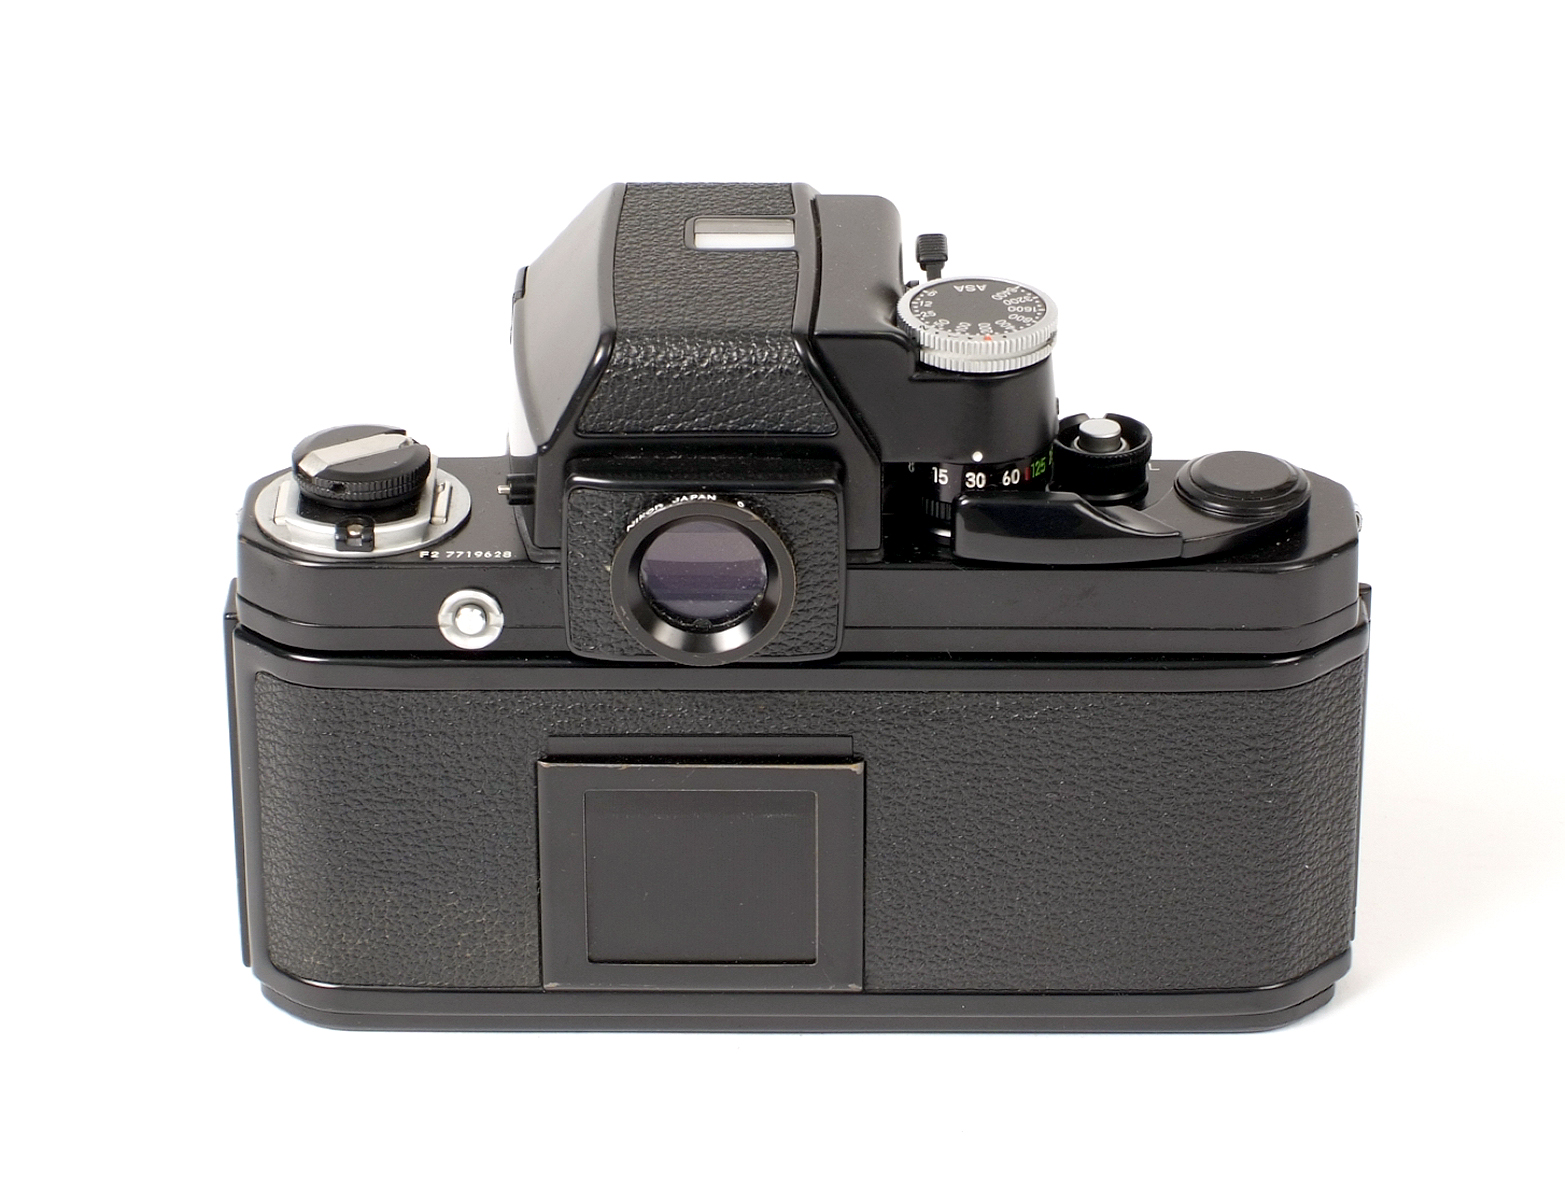 Pair of Nikon F2A Photomic Camera Bodies. - Image 7 of 7